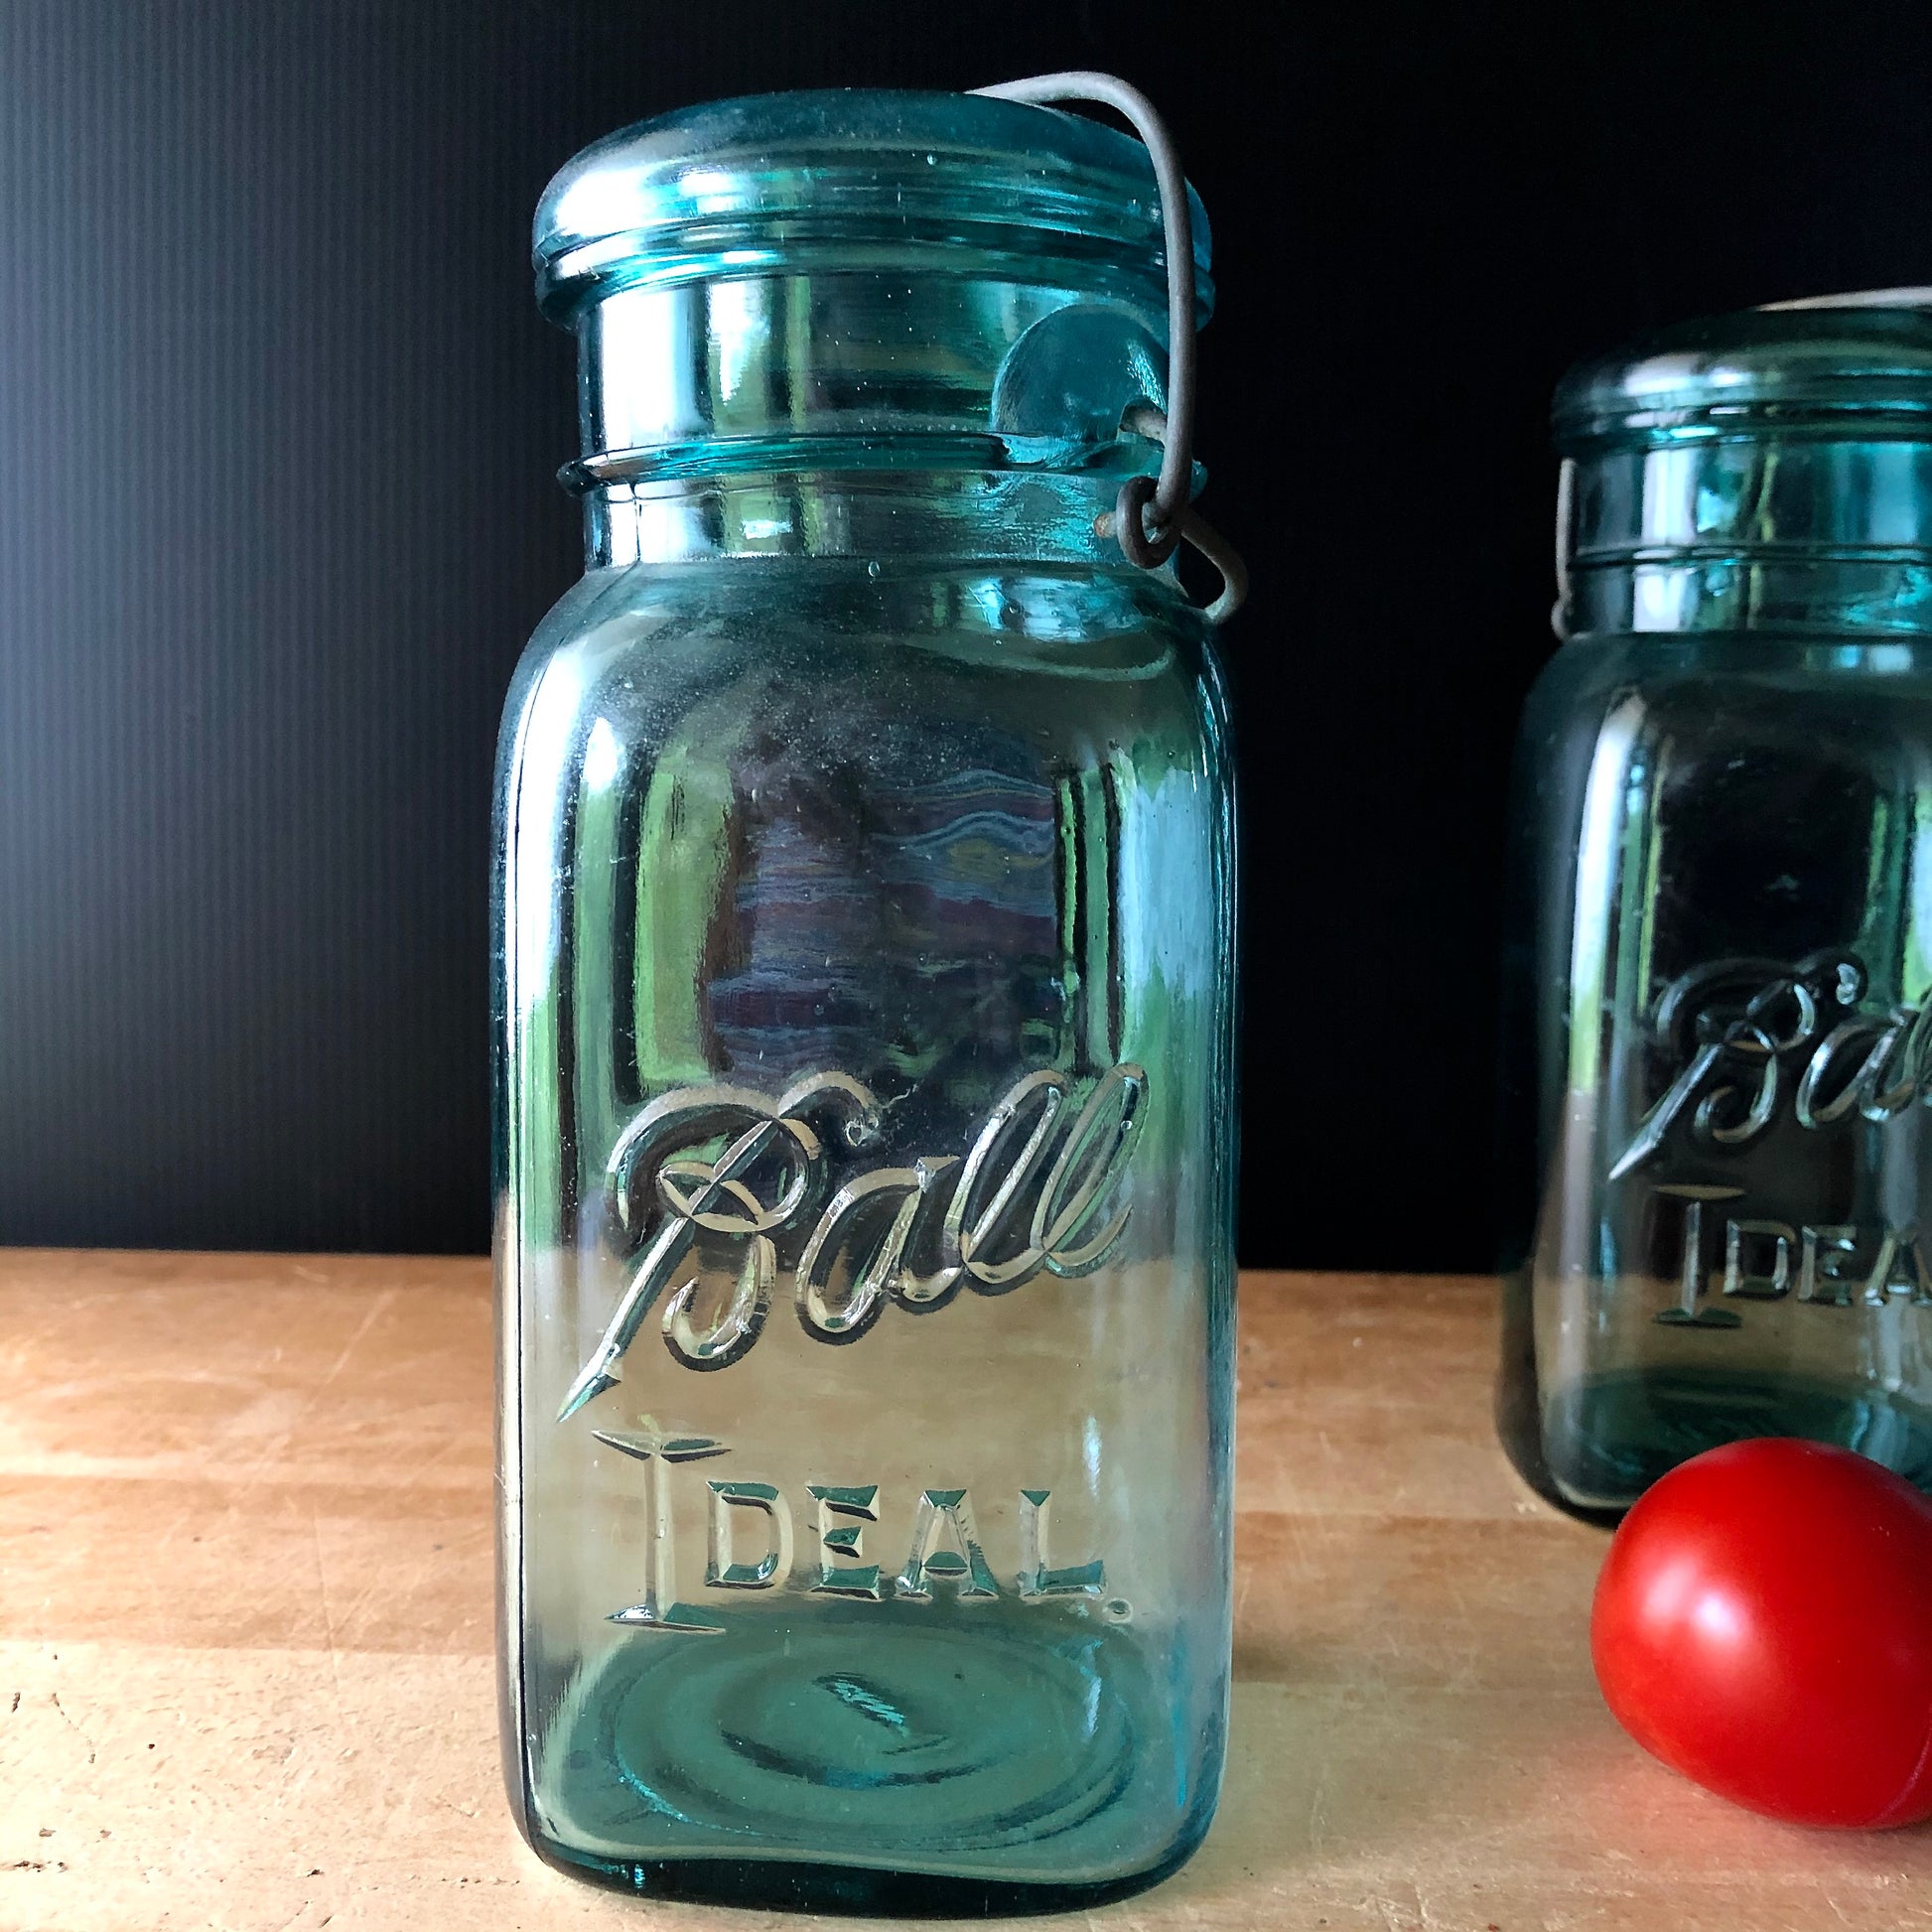 Mason jar maker Ball's next iconic drinkware could be made from aluminum